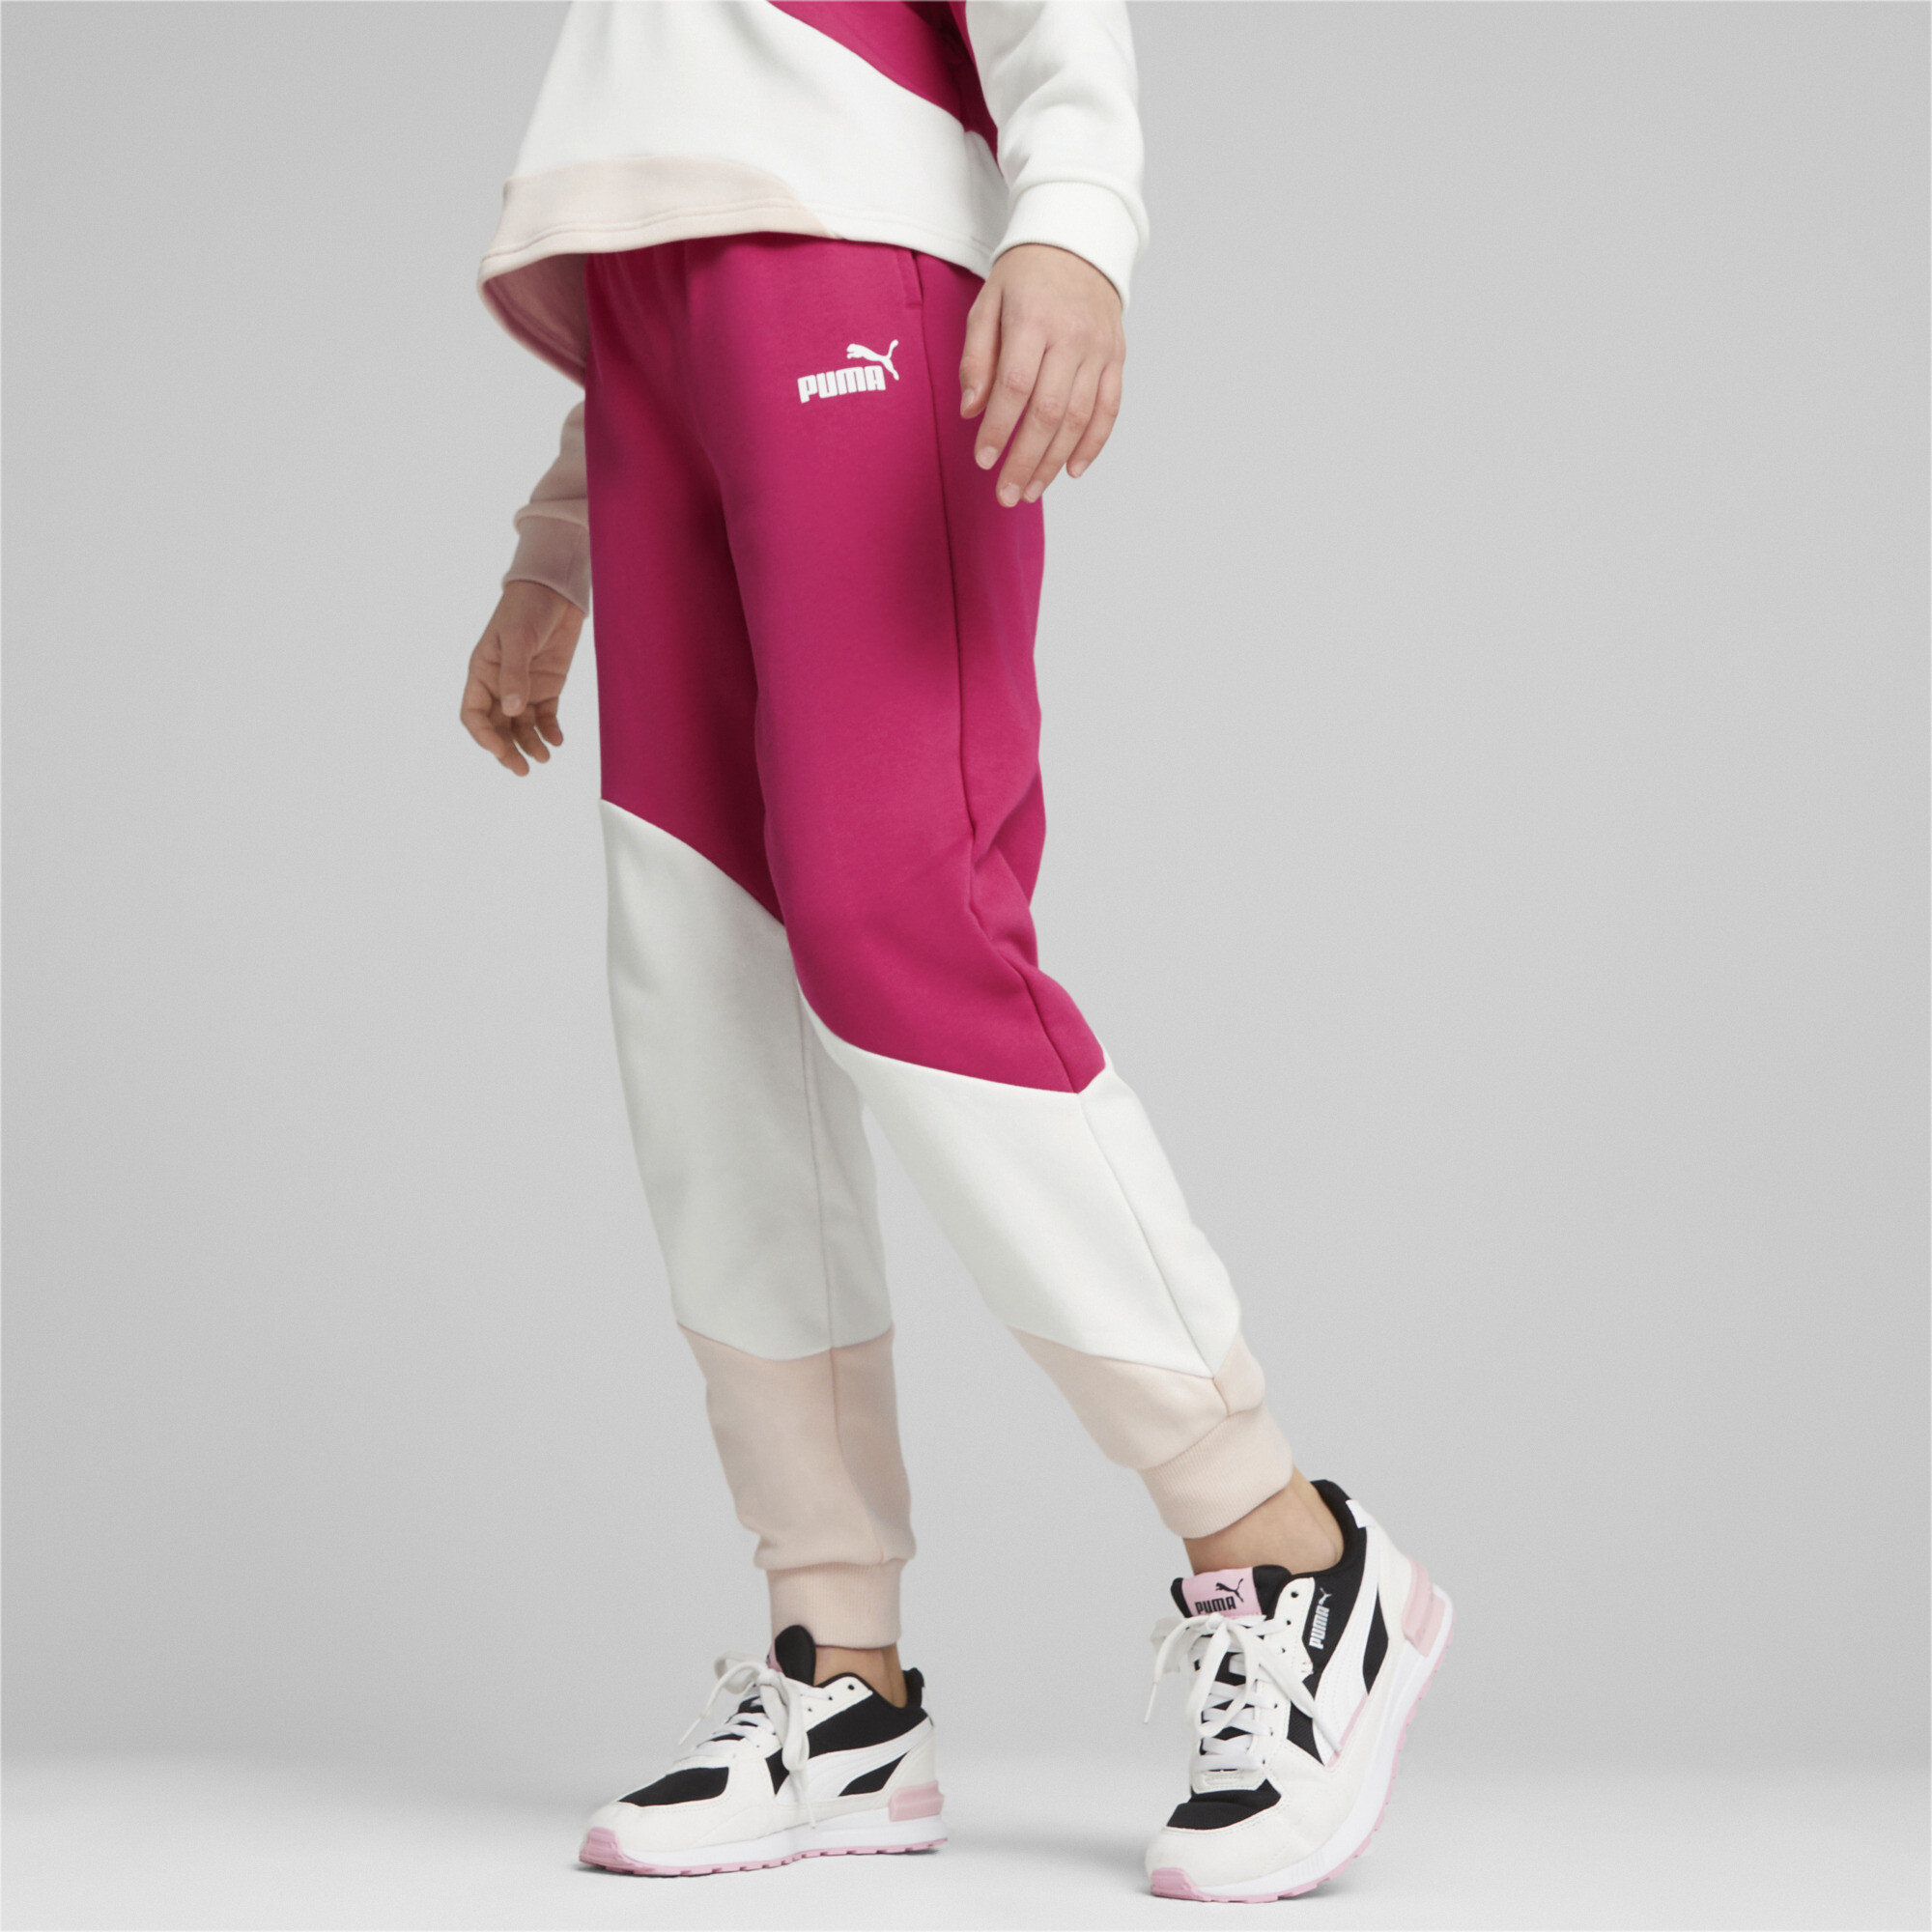 PUMA POWER Cat Pants In Pink, Size 7-8 Youth